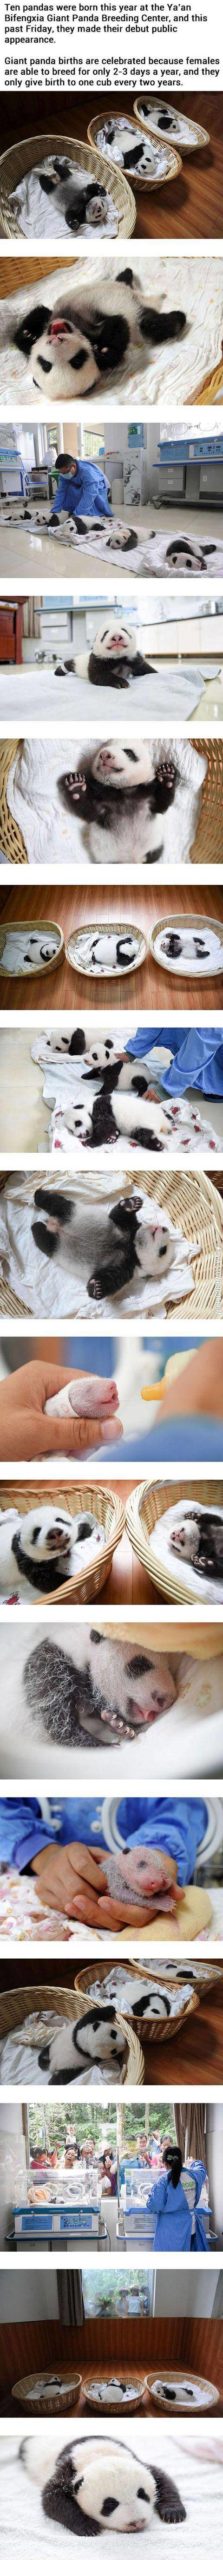 Meanwhile+at+the+chinese+panda+breeding+center